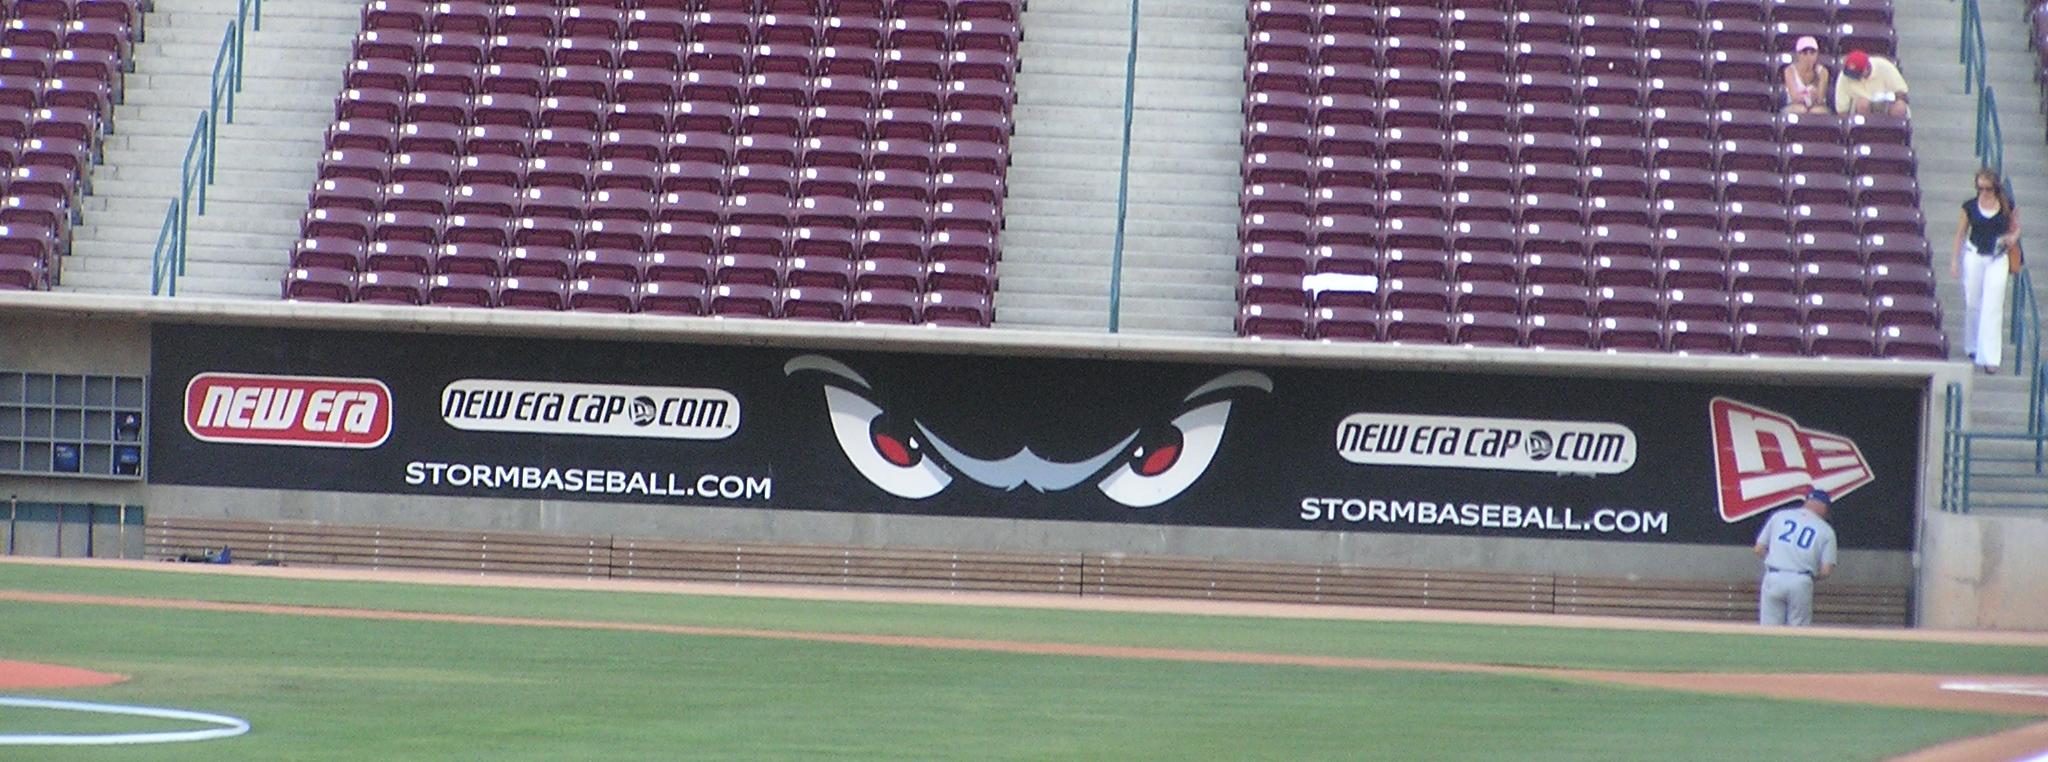 The best dugout wall in baseball!!! Lake Elsinore